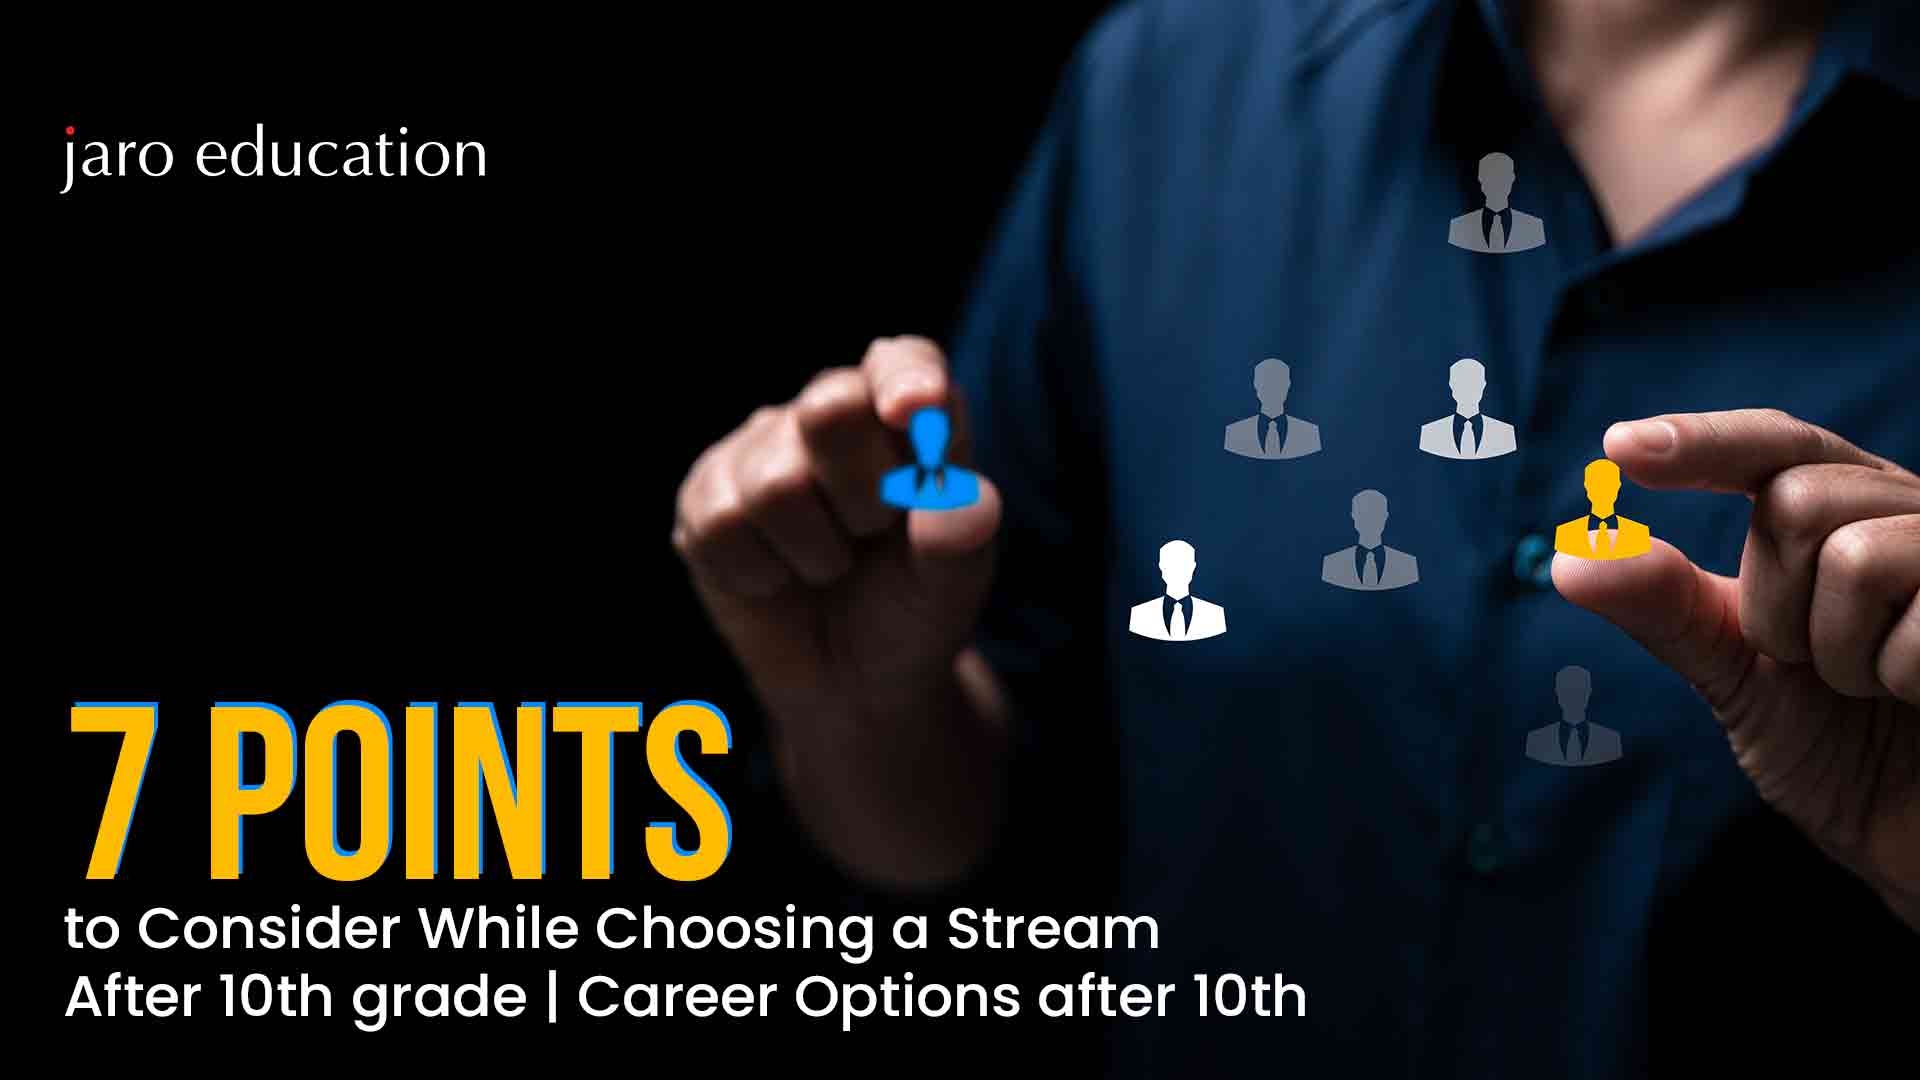 7-Points-to-Consider-While-Choosing-a-Stream-After-10th-grade--Career-Options-after-10th